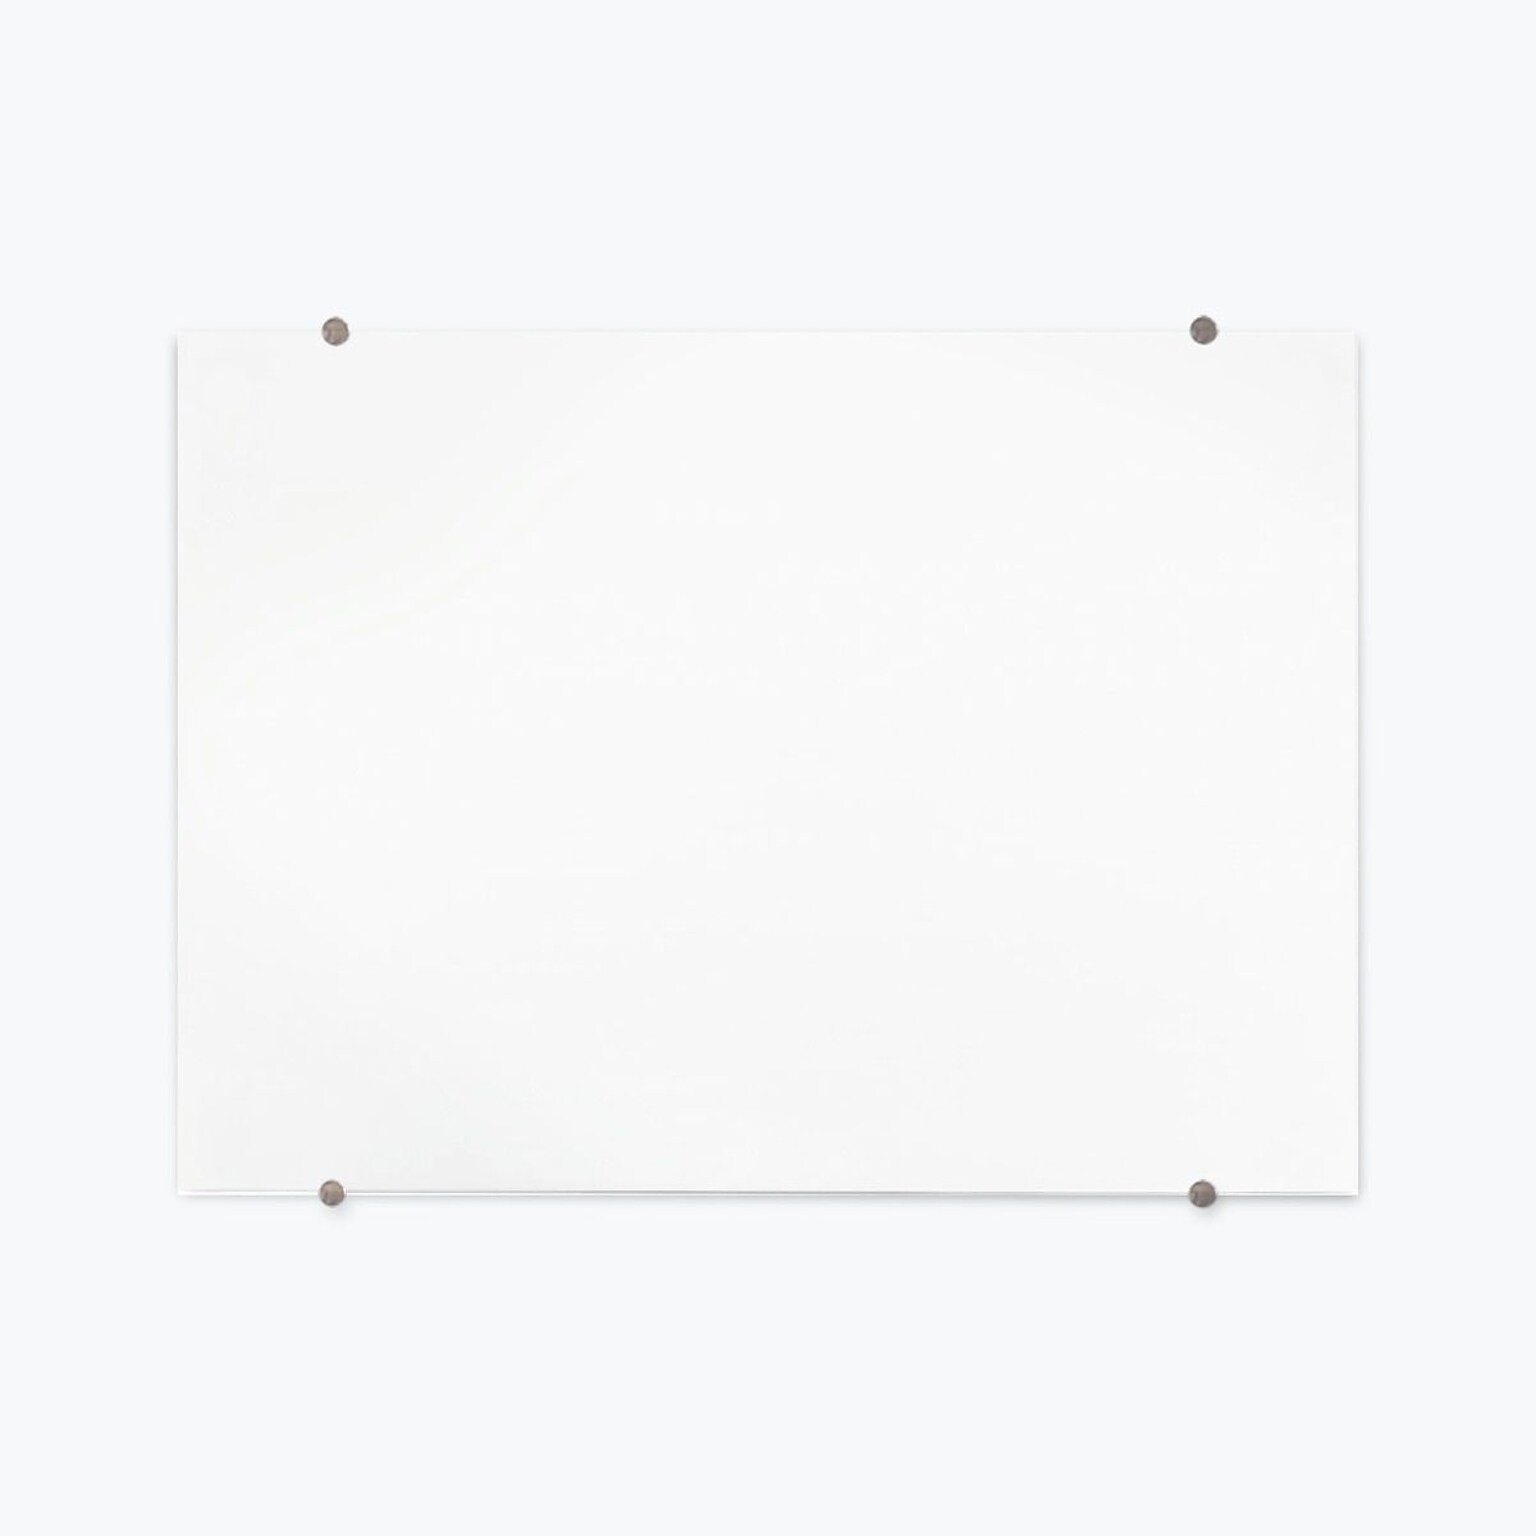 Luxor Magnetic Wall Mounted Glass Dry Erase Board, 48x36 (WGB4836M)